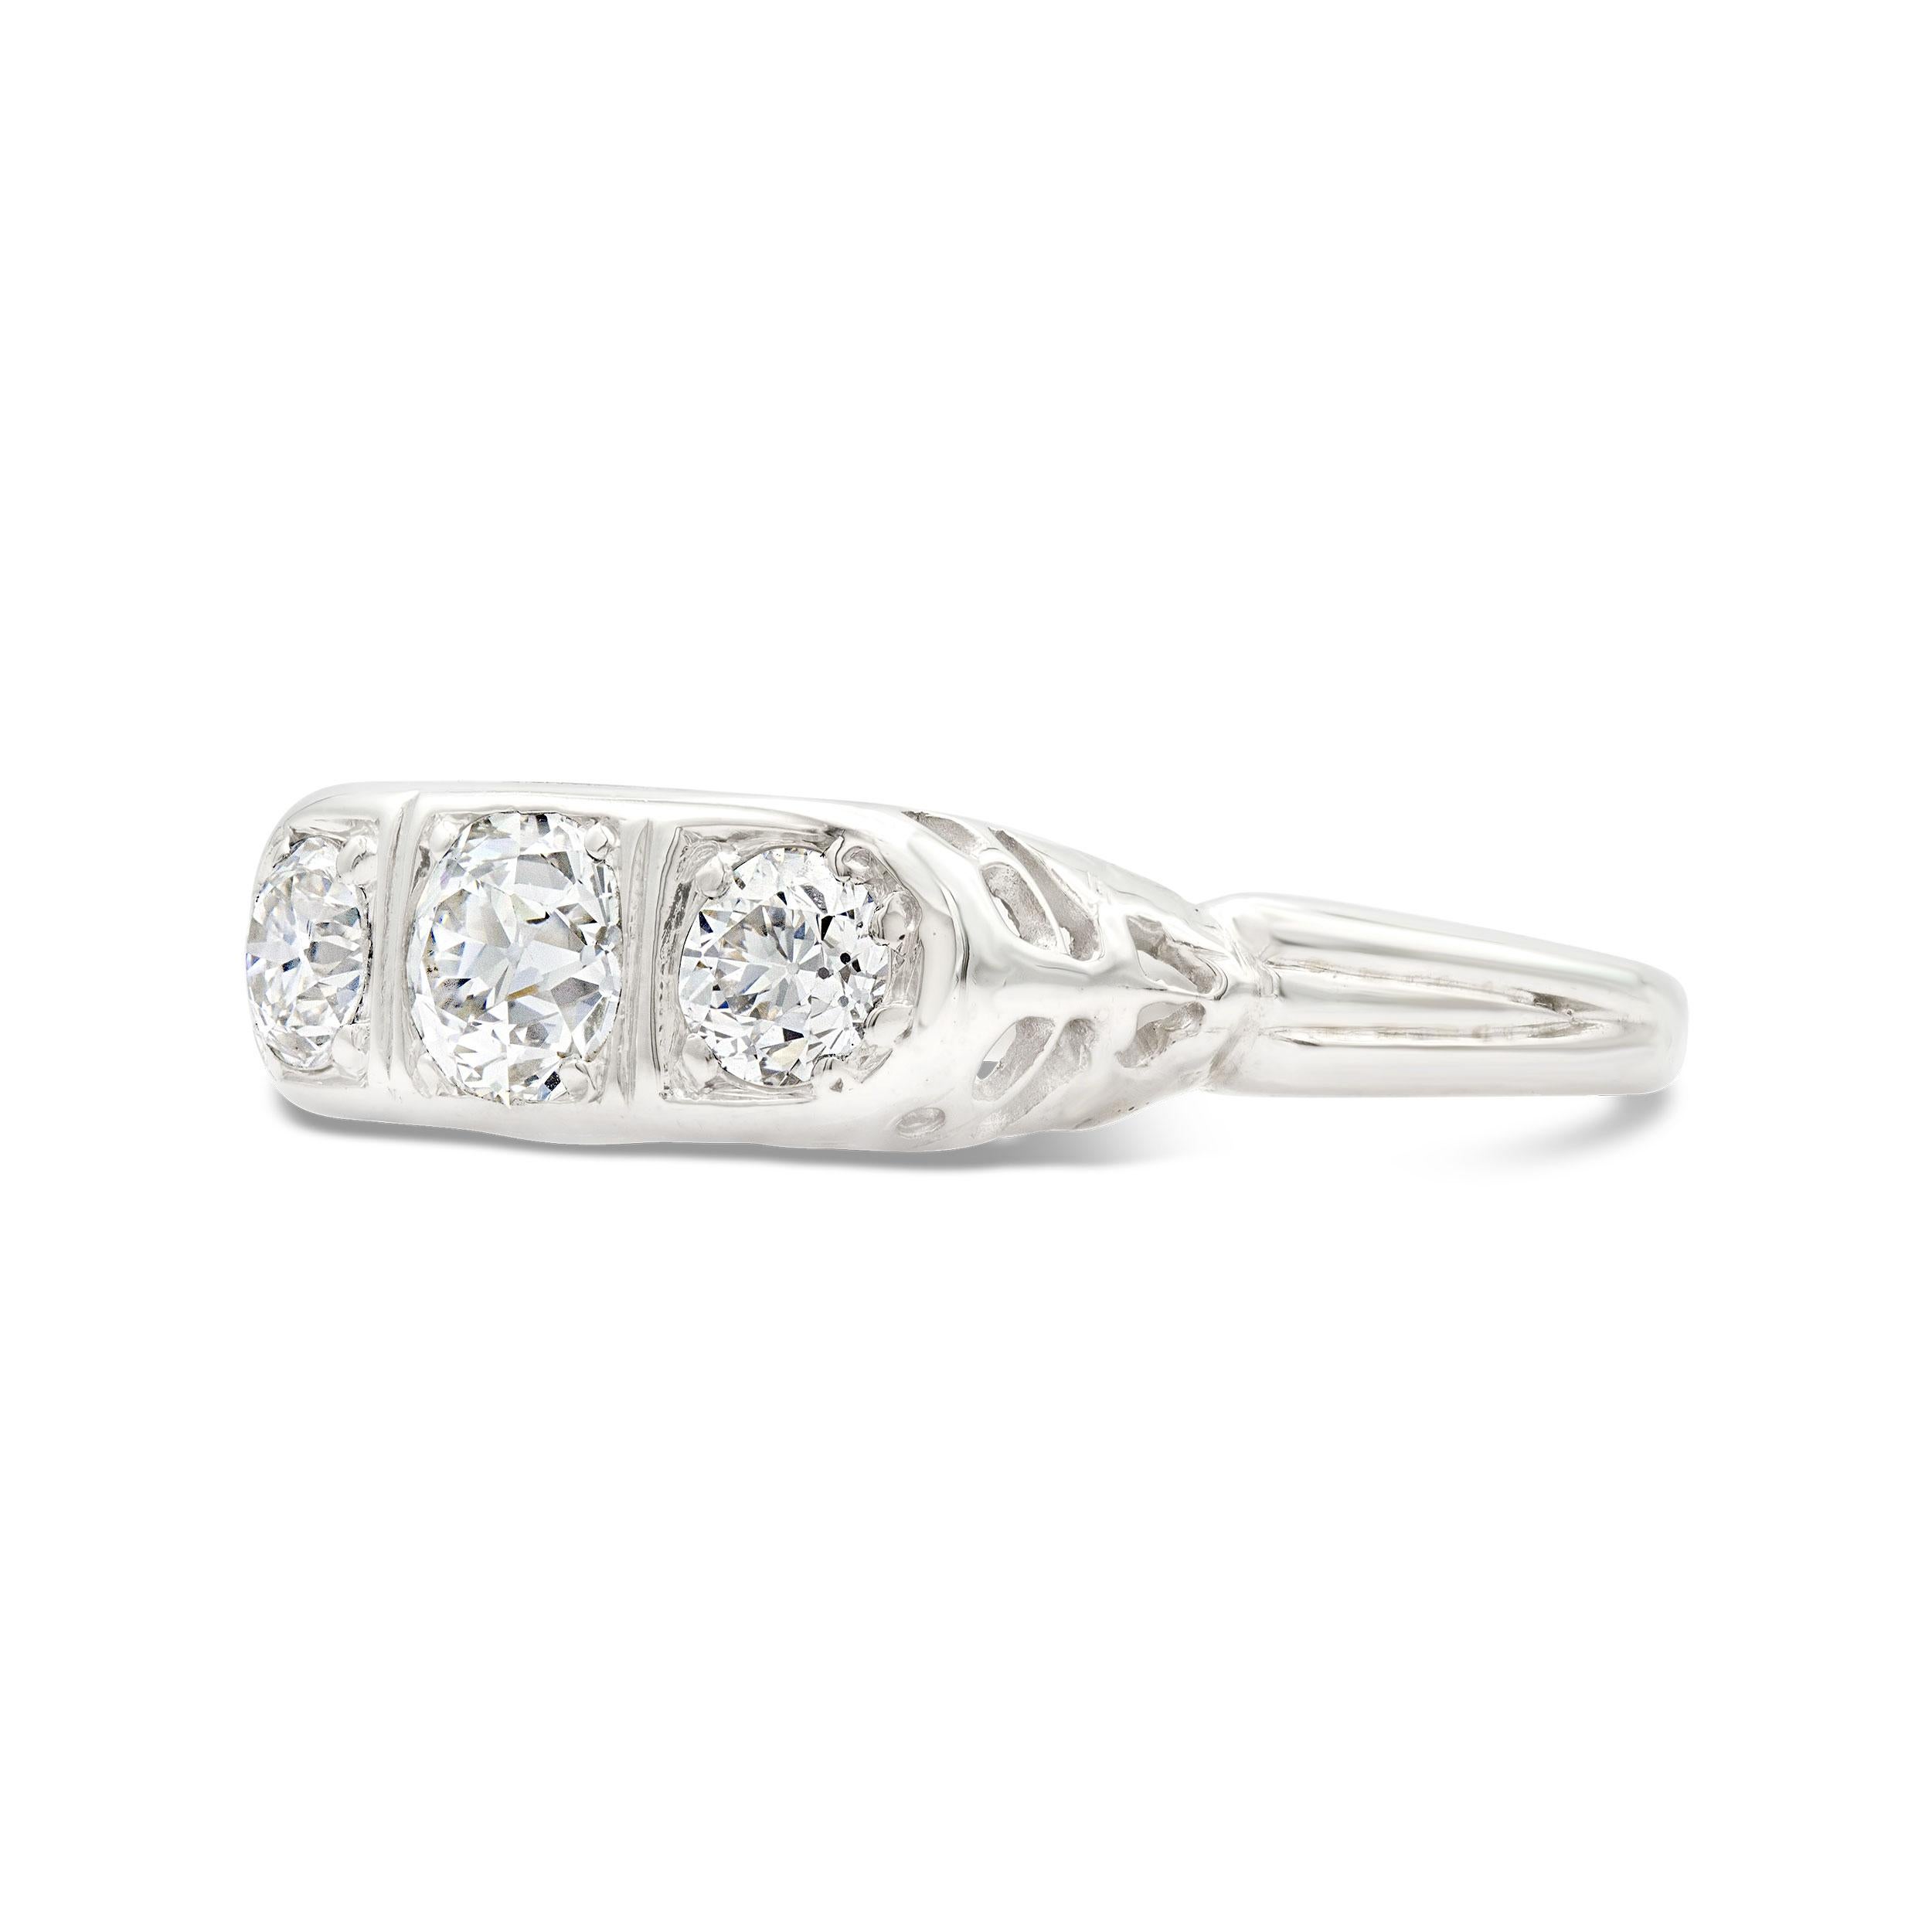 A beyond charming diamond trilogy ring features three twinkling old European cut diamonds weighing 0.85 carats total. The gallery of the ring features unique filigree work, hand crafted in platinum. The diamonds offer up finger-spanning sparkle that